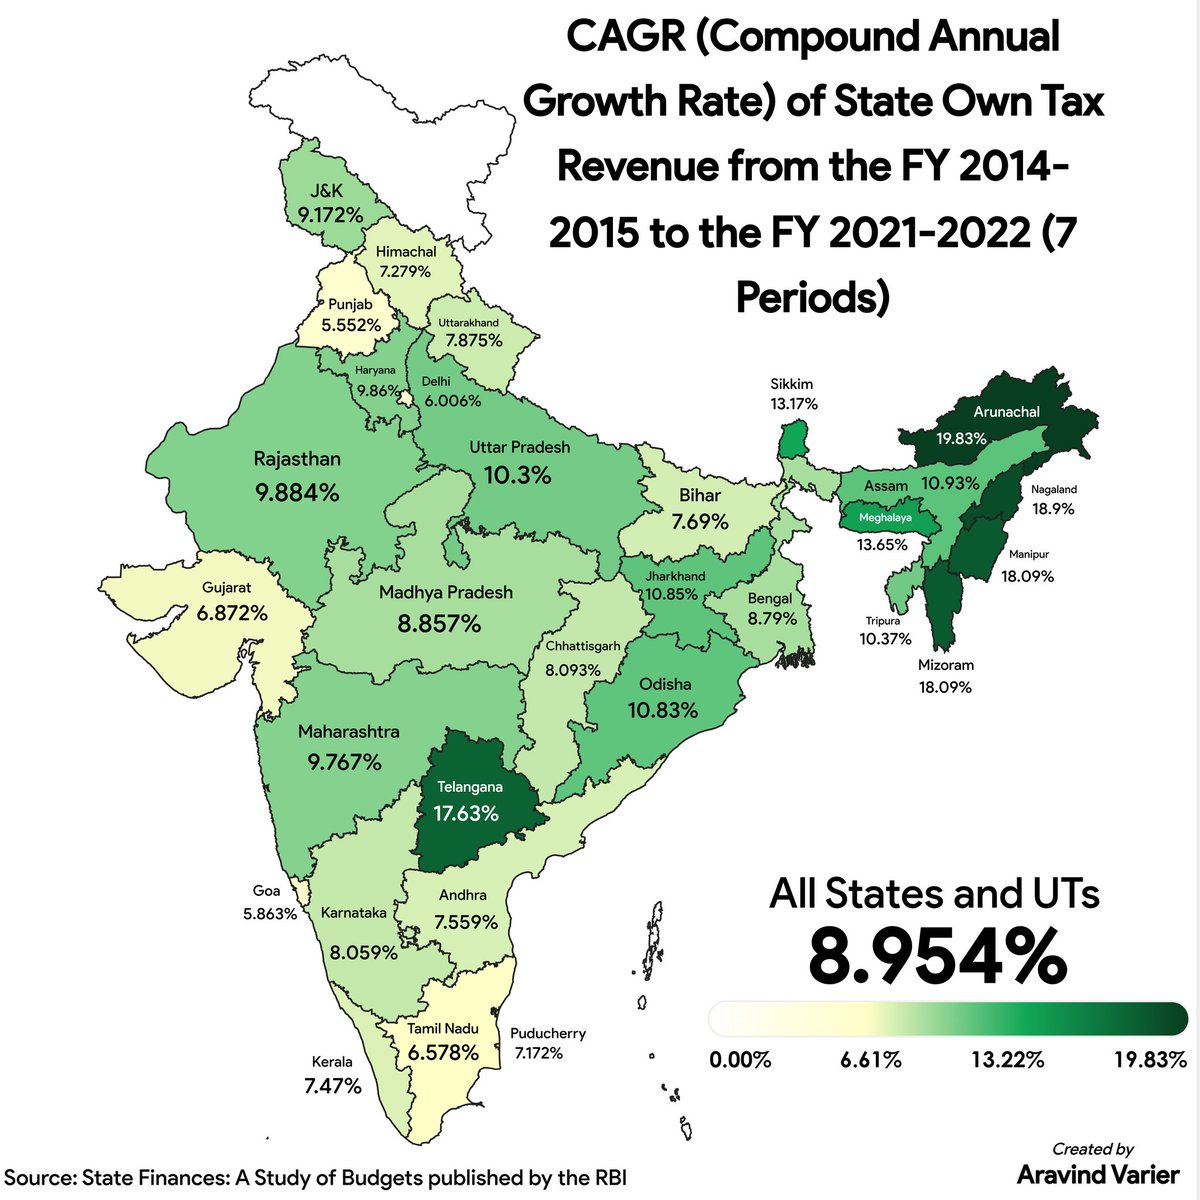 CAGR (Compound Annual Growth Rate) 
of State Own Tax Revenue from the FY 2014-2015 to the FY 2021-2022 (7 Periods)